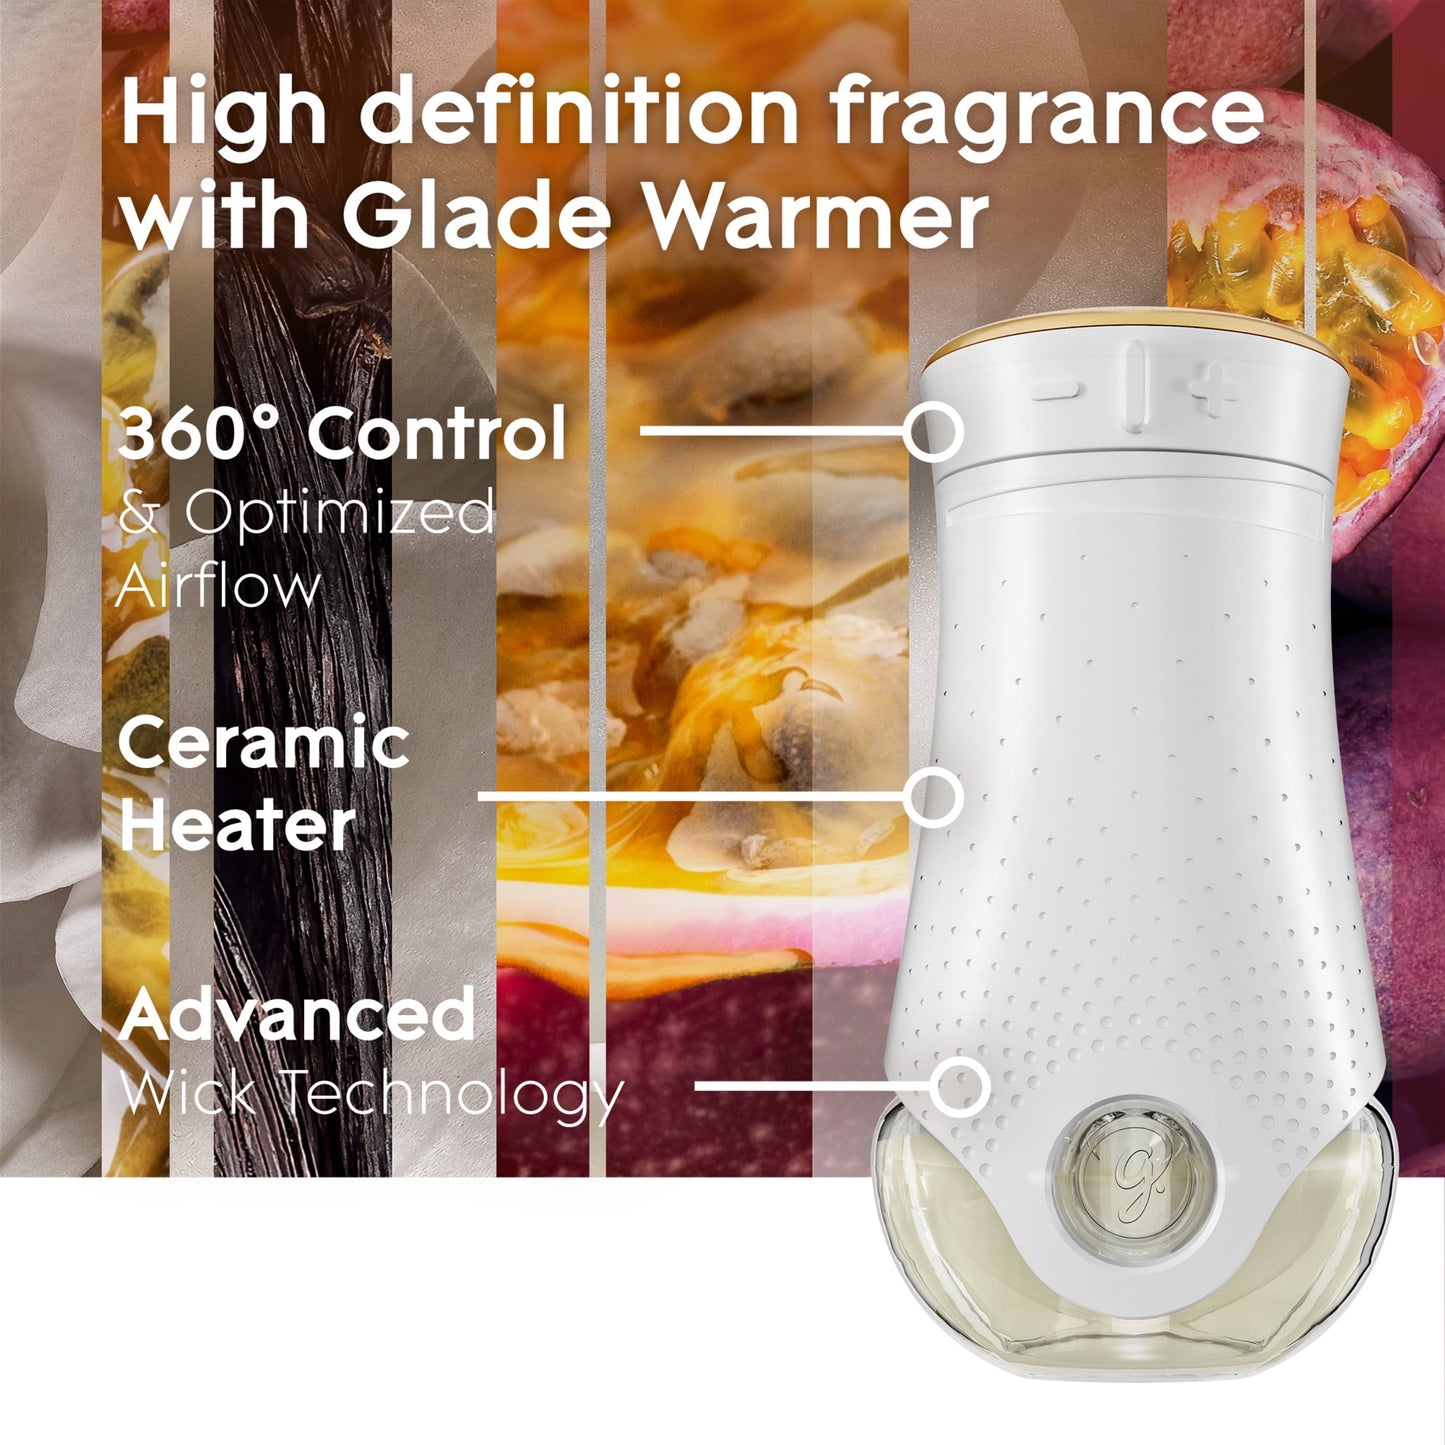 Glade PlugIns Refill 2 ct, Vanilla Passion Fruit, 1.34 FL. oz. Total, Scented Oil Air Freshener Infused with Essential Oils